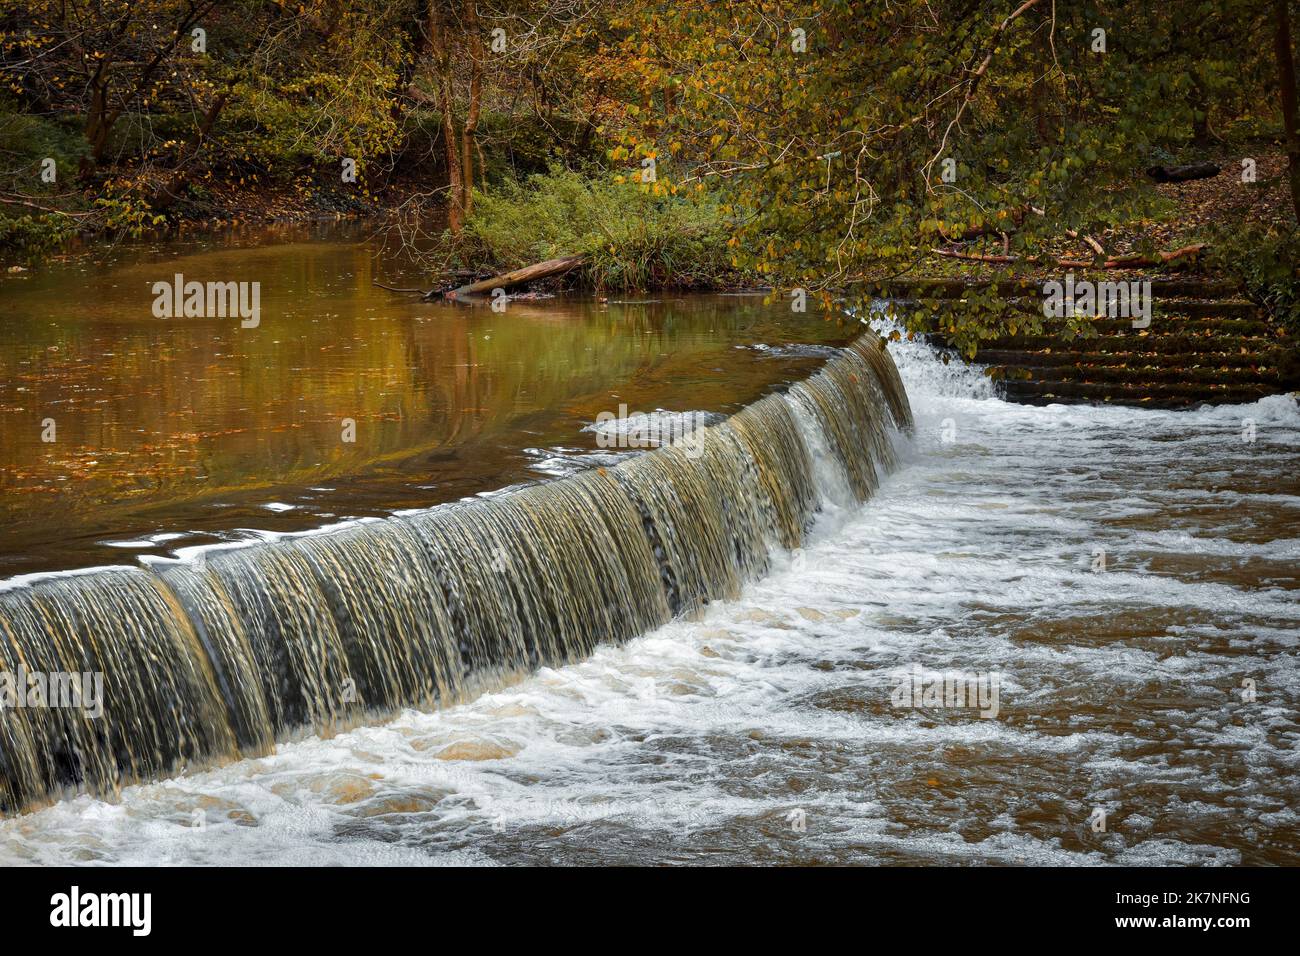 Autumn scene at Vassells Park, Oldbury Court Estate, Bristol, UK and the River Frome and weir Stock Photo